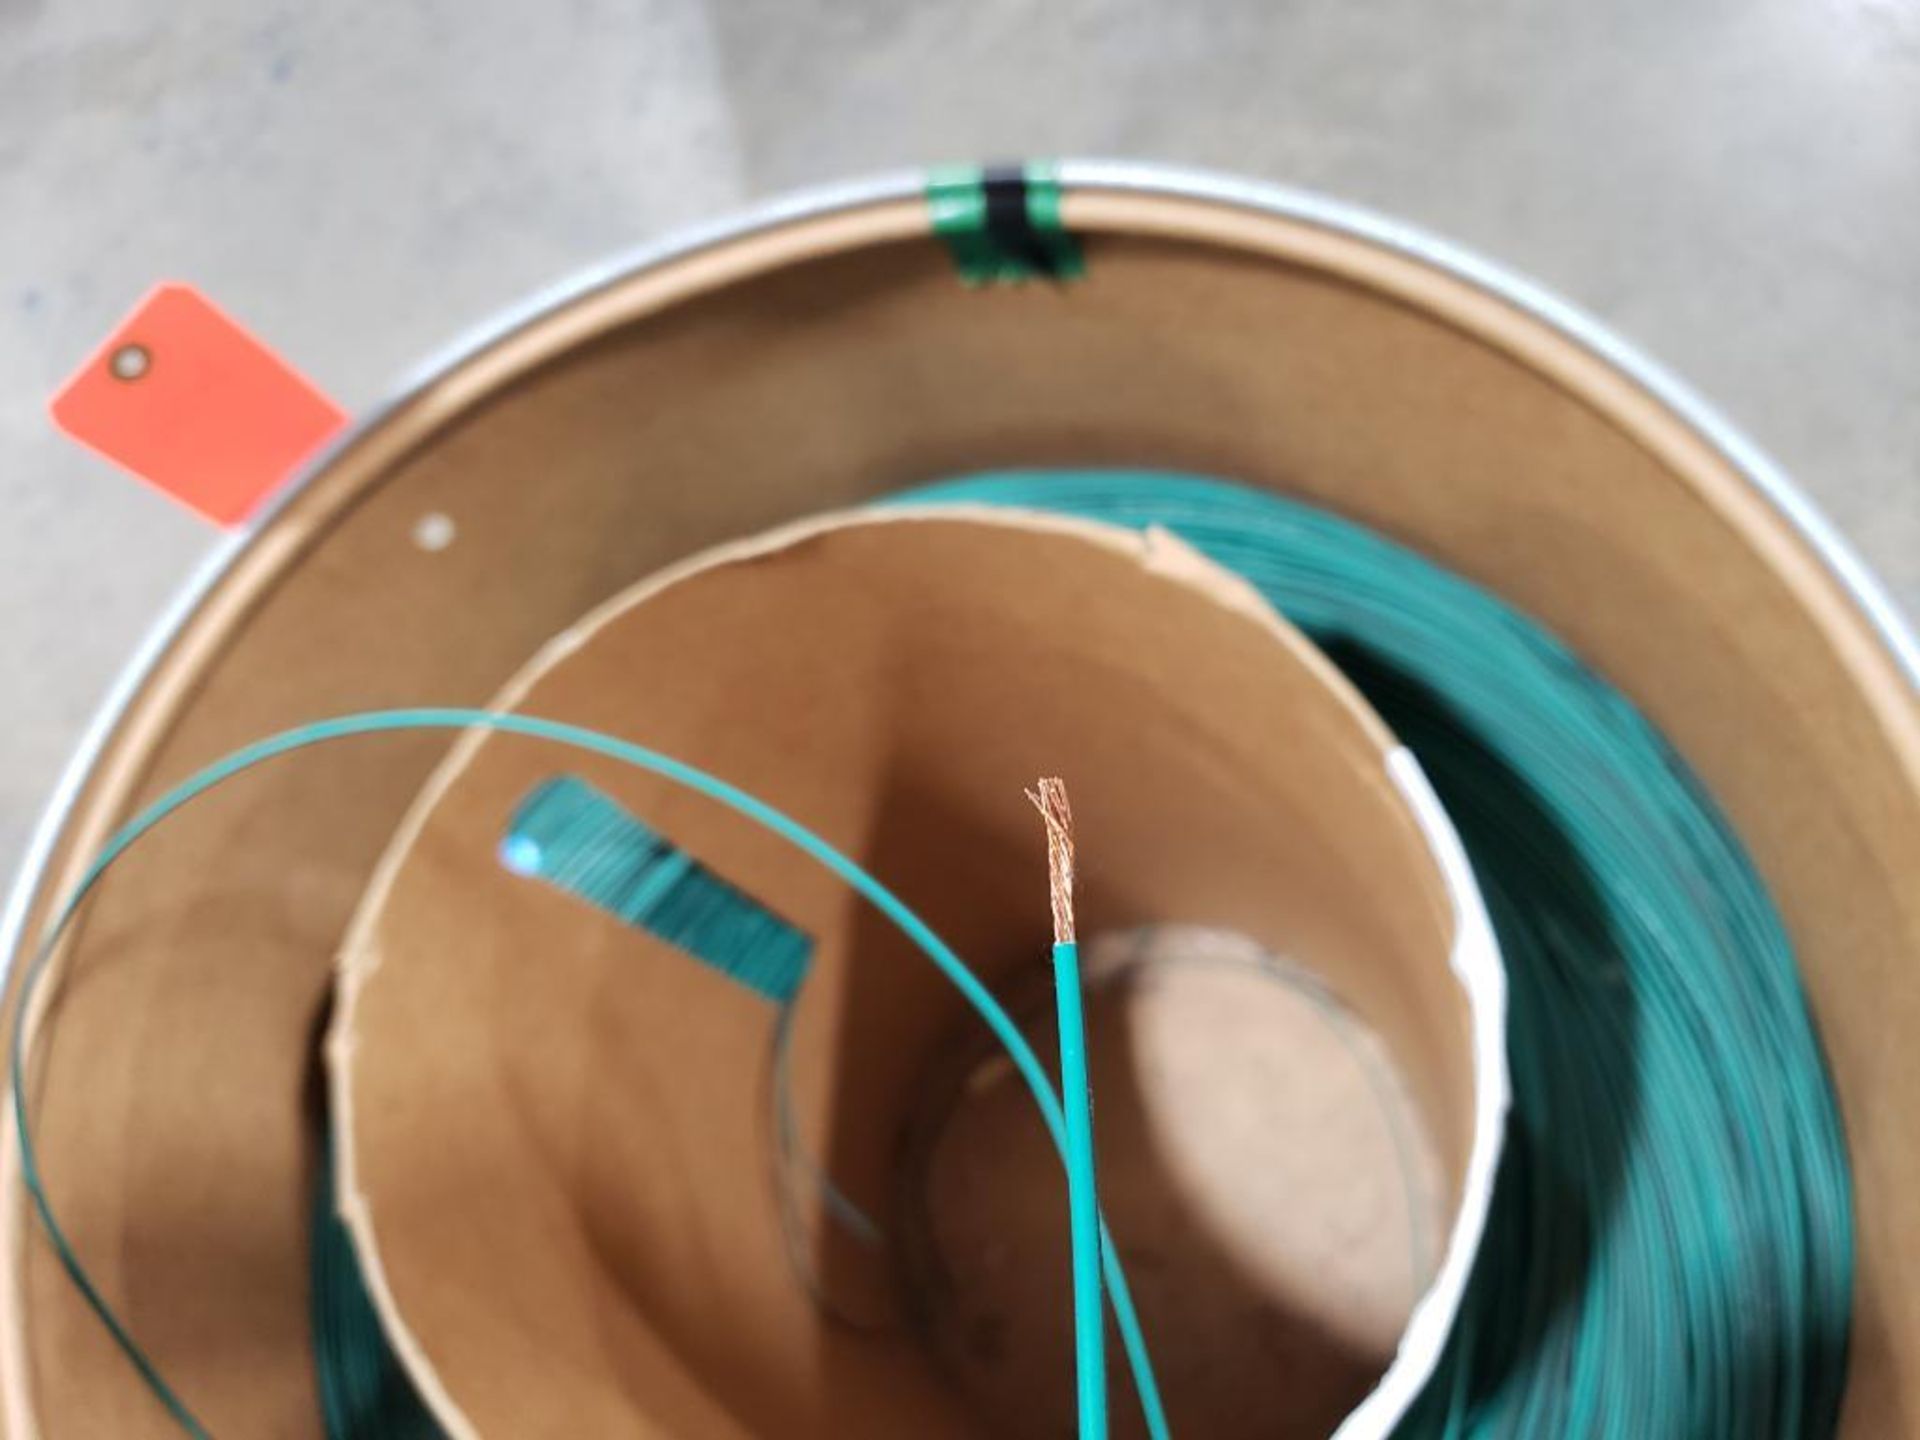 14 awg green / black printed copper wire. Gross barrel weight, 289lbs. Partial barrel. - Image 3 of 5